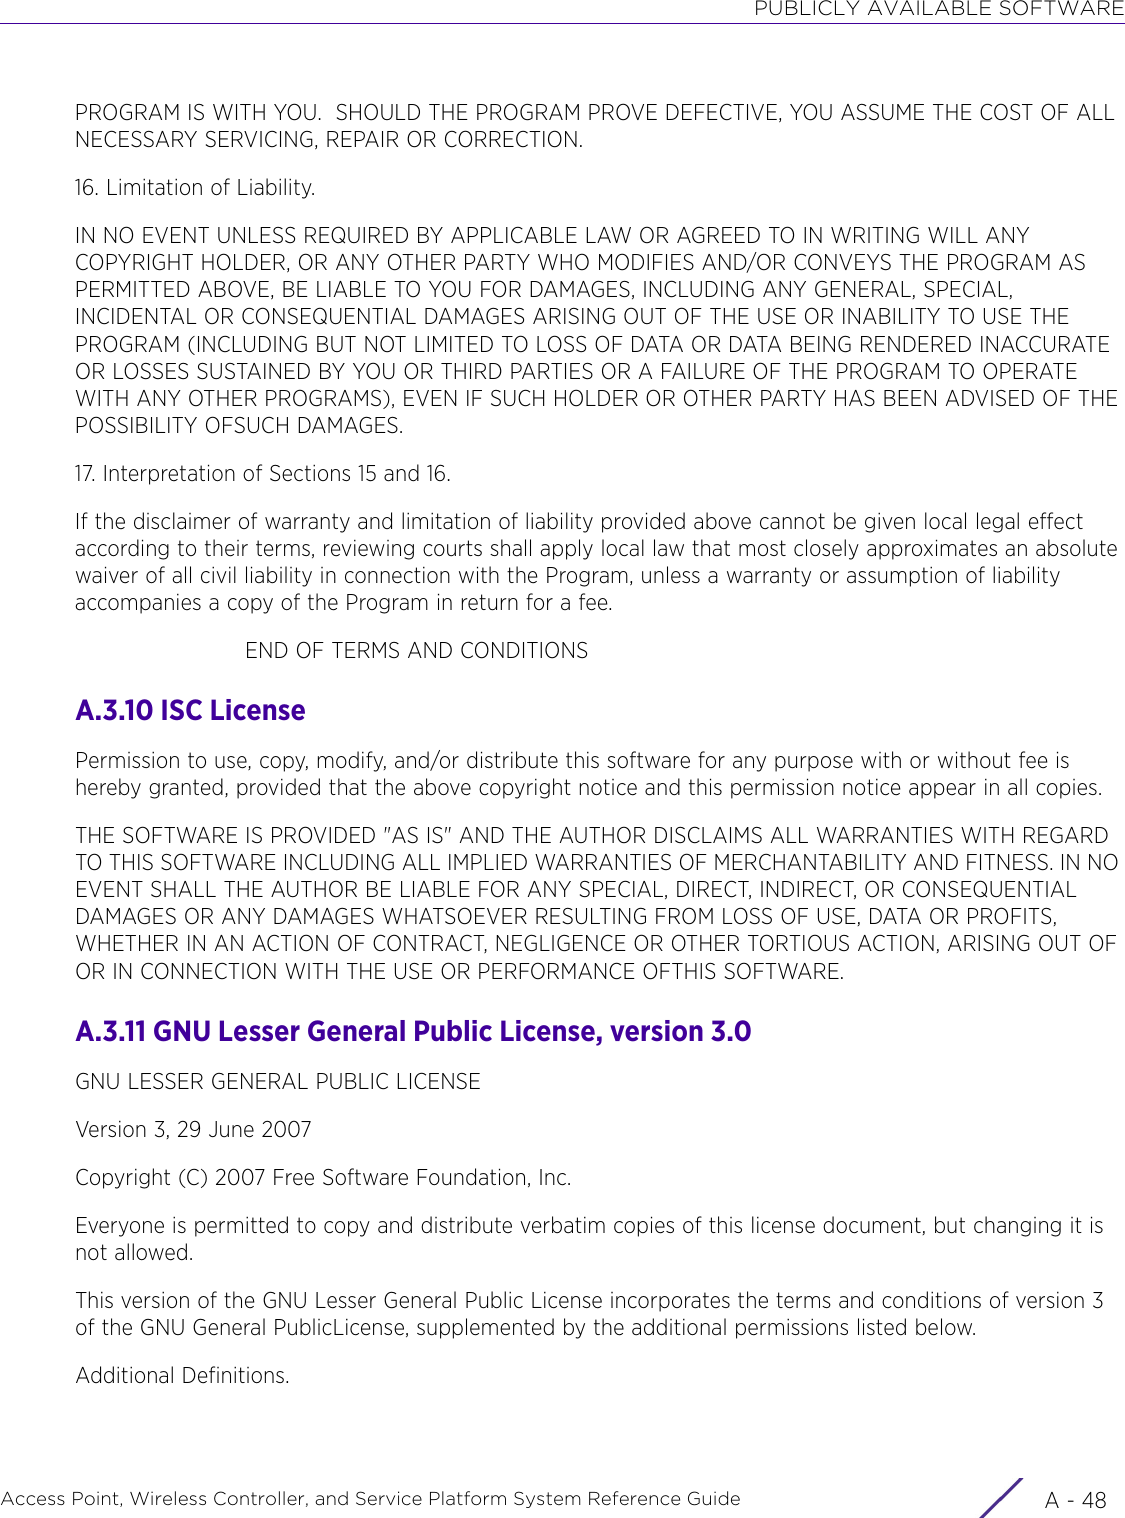 PUBLICLY AVAILABLE SOFTWAREAccess Point, Wireless Controller, and Service Platform System Reference Guide  A - 48PROGRAM IS WITH YOU.  SHOULD THE PROGRAM PROVE DEFECTIVE, YOU ASSUME THE COST OF ALL NECESSARY SERVICING, REPAIR OR CORRECTION.16. Limitation of Liability.IN NO EVENT UNLESS REQUIRED BY APPLICABLE LAW OR AGREED TO IN WRITING WILL ANY COPYRIGHT HOLDER, OR ANY OTHER PARTY WHO MODIFIES AND/OR CONVEYS THE PROGRAM AS PERMITTED ABOVE, BE LIABLE TO YOU FOR DAMAGES, INCLUDING ANY GENERAL, SPECIAL, INCIDENTAL OR CONSEQUENTIAL DAMAGES ARISING OUT OF THE USE OR INABILITY TO USE THE PROGRAM (INCLUDING BUT NOT LIMITED TO LOSS OF DATA OR DATA BEING RENDERED INACCURATE OR LOSSES SUSTAINED BY YOU OR THIRD PARTIES OR A FAILURE OF THE PROGRAM TO OPERATE WITH ANY OTHER PROGRAMS), EVEN IF SUCH HOLDER OR OTHER PARTY HAS BEEN ADVISED OF THE POSSIBILITY OFSUCH DAMAGES.17. Interpretation of Sections 15 and 16.If the disclaimer of warranty and limitation of liability provided above cannot be given local legal effect according to their terms, reviewing courts shall apply local law that most closely approximates an absolute waiver of all civil liability in connection with the Program, unless a warranty or assumption of liability accompanies a copy of the Program in return for a fee.                         END OF TERMS AND CONDITIONSA.3.10 ISC LicensePermission to use, copy, modify, and/or distribute this software for any purpose with or without fee is hereby granted, provided that the above copyright notice and this permission notice appear in all copies.THE SOFTWARE IS PROVIDED &quot;AS IS&quot; AND THE AUTHOR DISCLAIMS ALL WARRANTIES WITH REGARD TO THIS SOFTWARE INCLUDING ALL IMPLIED WARRANTIES OF MERCHANTABILITY AND FITNESS. IN NO EVENT SHALL THE AUTHOR BE LIABLE FOR ANY SPECIAL, DIRECT, INDIRECT, OR CONSEQUENTIAL DAMAGES OR ANY DAMAGES WHATSOEVER RESULTING FROM LOSS OF USE, DATA OR PROFITS, WHETHER IN AN ACTION OF CONTRACT, NEGLIGENCE OR OTHER TORTIOUS ACTION, ARISING OUT OF OR IN CONNECTION WITH THE USE OR PERFORMANCE OFTHIS SOFTWARE.A.3.11 GNU Lesser General Public License, version 3.0GNU LESSER GENERAL PUBLIC LICENSEVersion 3, 29 June 2007Copyright (C) 2007 Free Software Foundation, Inc.Everyone is permitted to copy and distribute verbatim copies of this license document, but changing it is not allowed.This version of the GNU Lesser General Public License incorporates the terms and conditions of version 3 of the GNU General PublicLicense, supplemented by the additional permissions listed below.Additional Definitions. 